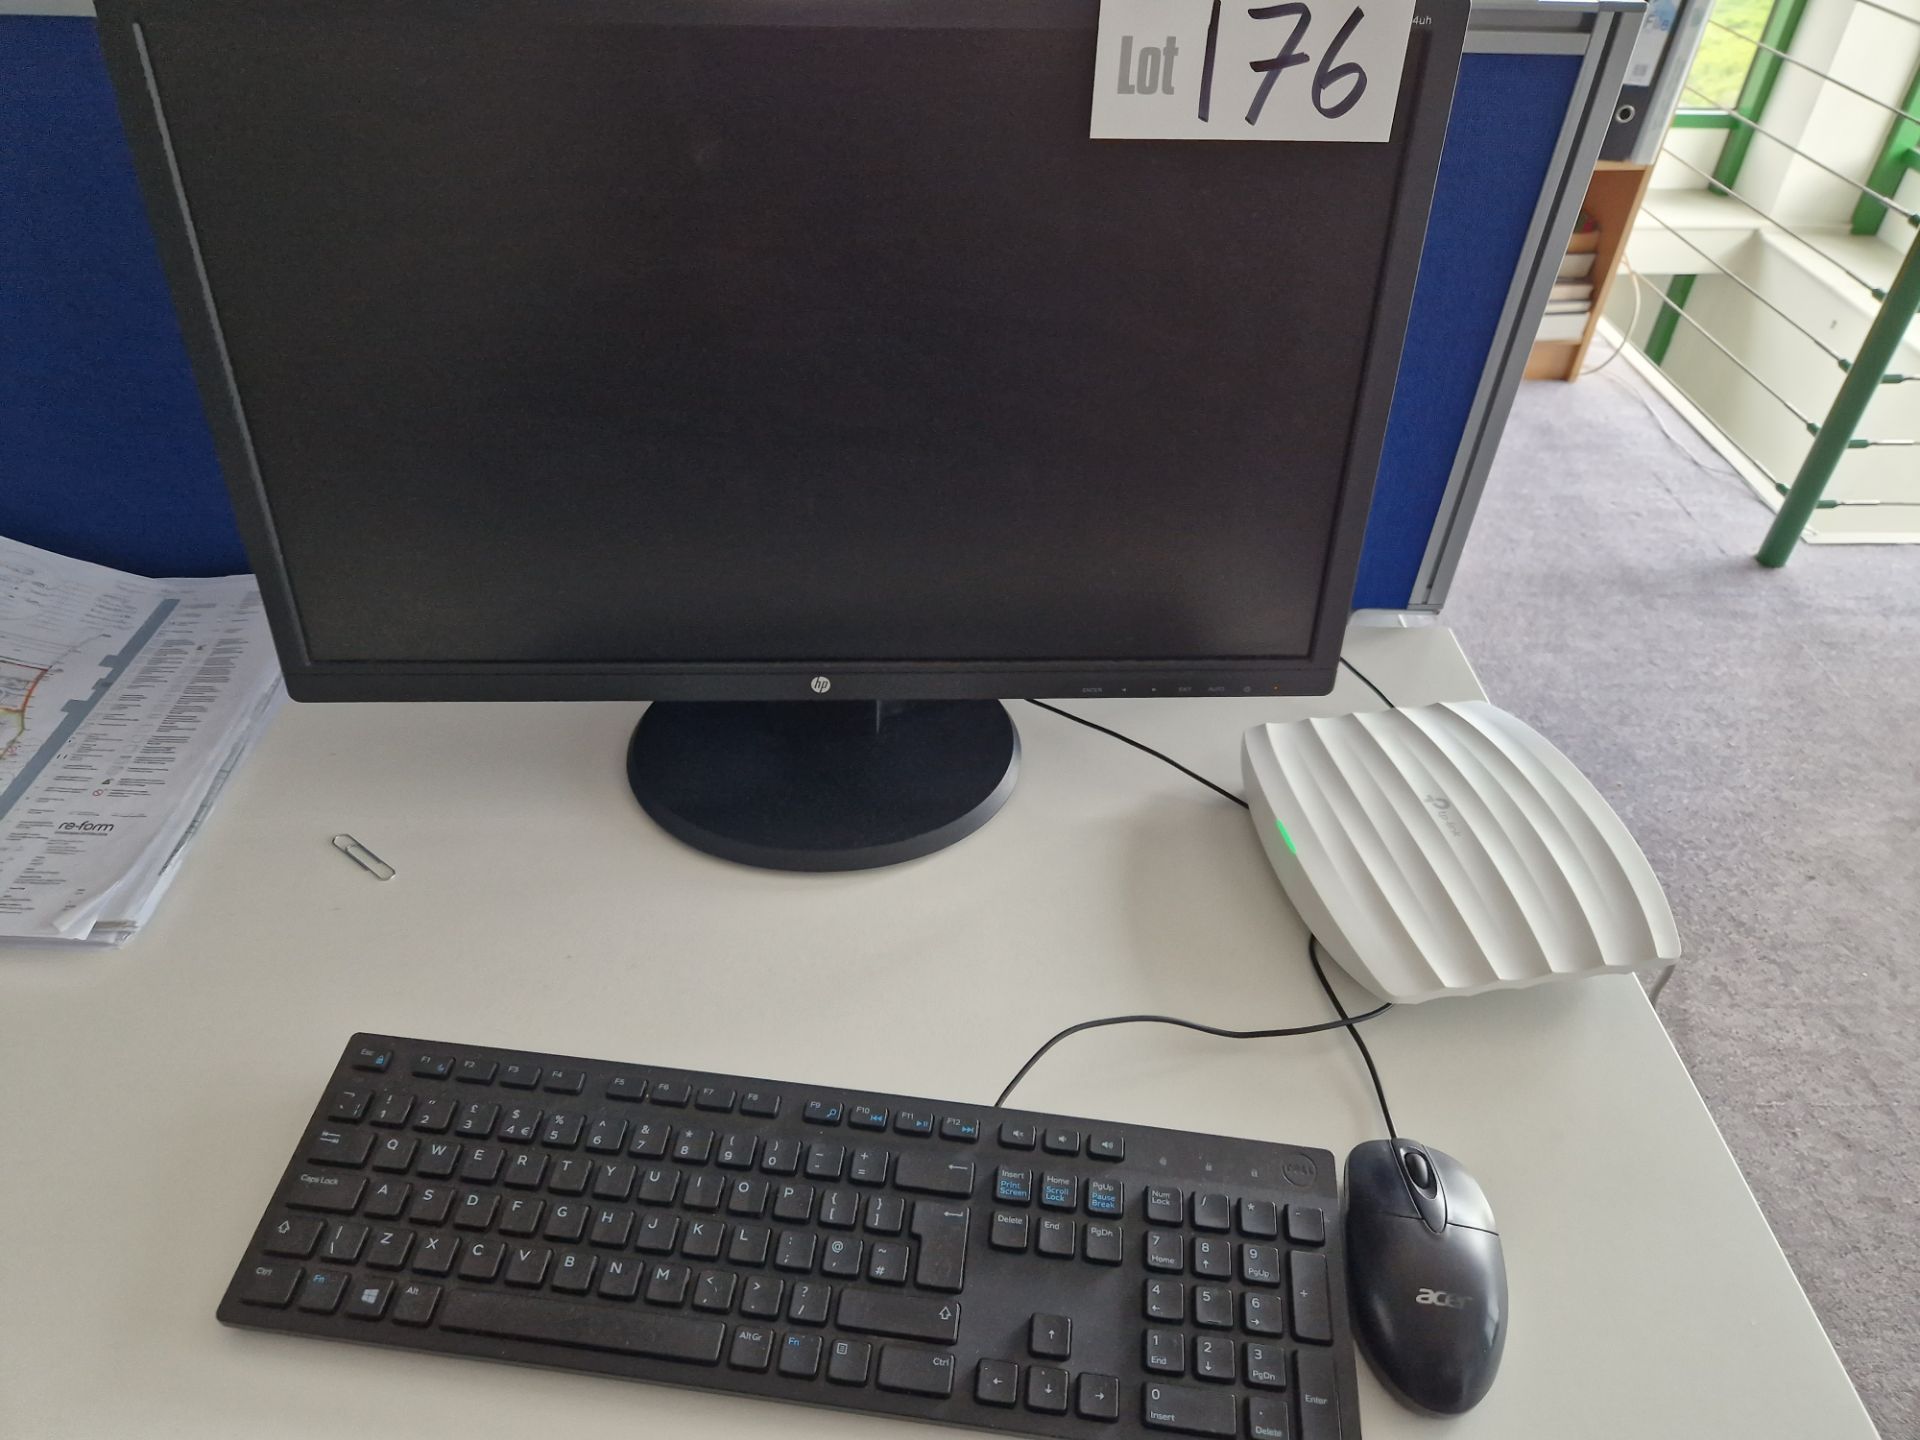 Dell OptiPlex 3040 Core i5 Desktop PC, Monitor, Keyboard and Mouse (Hard Drive Removed) Please